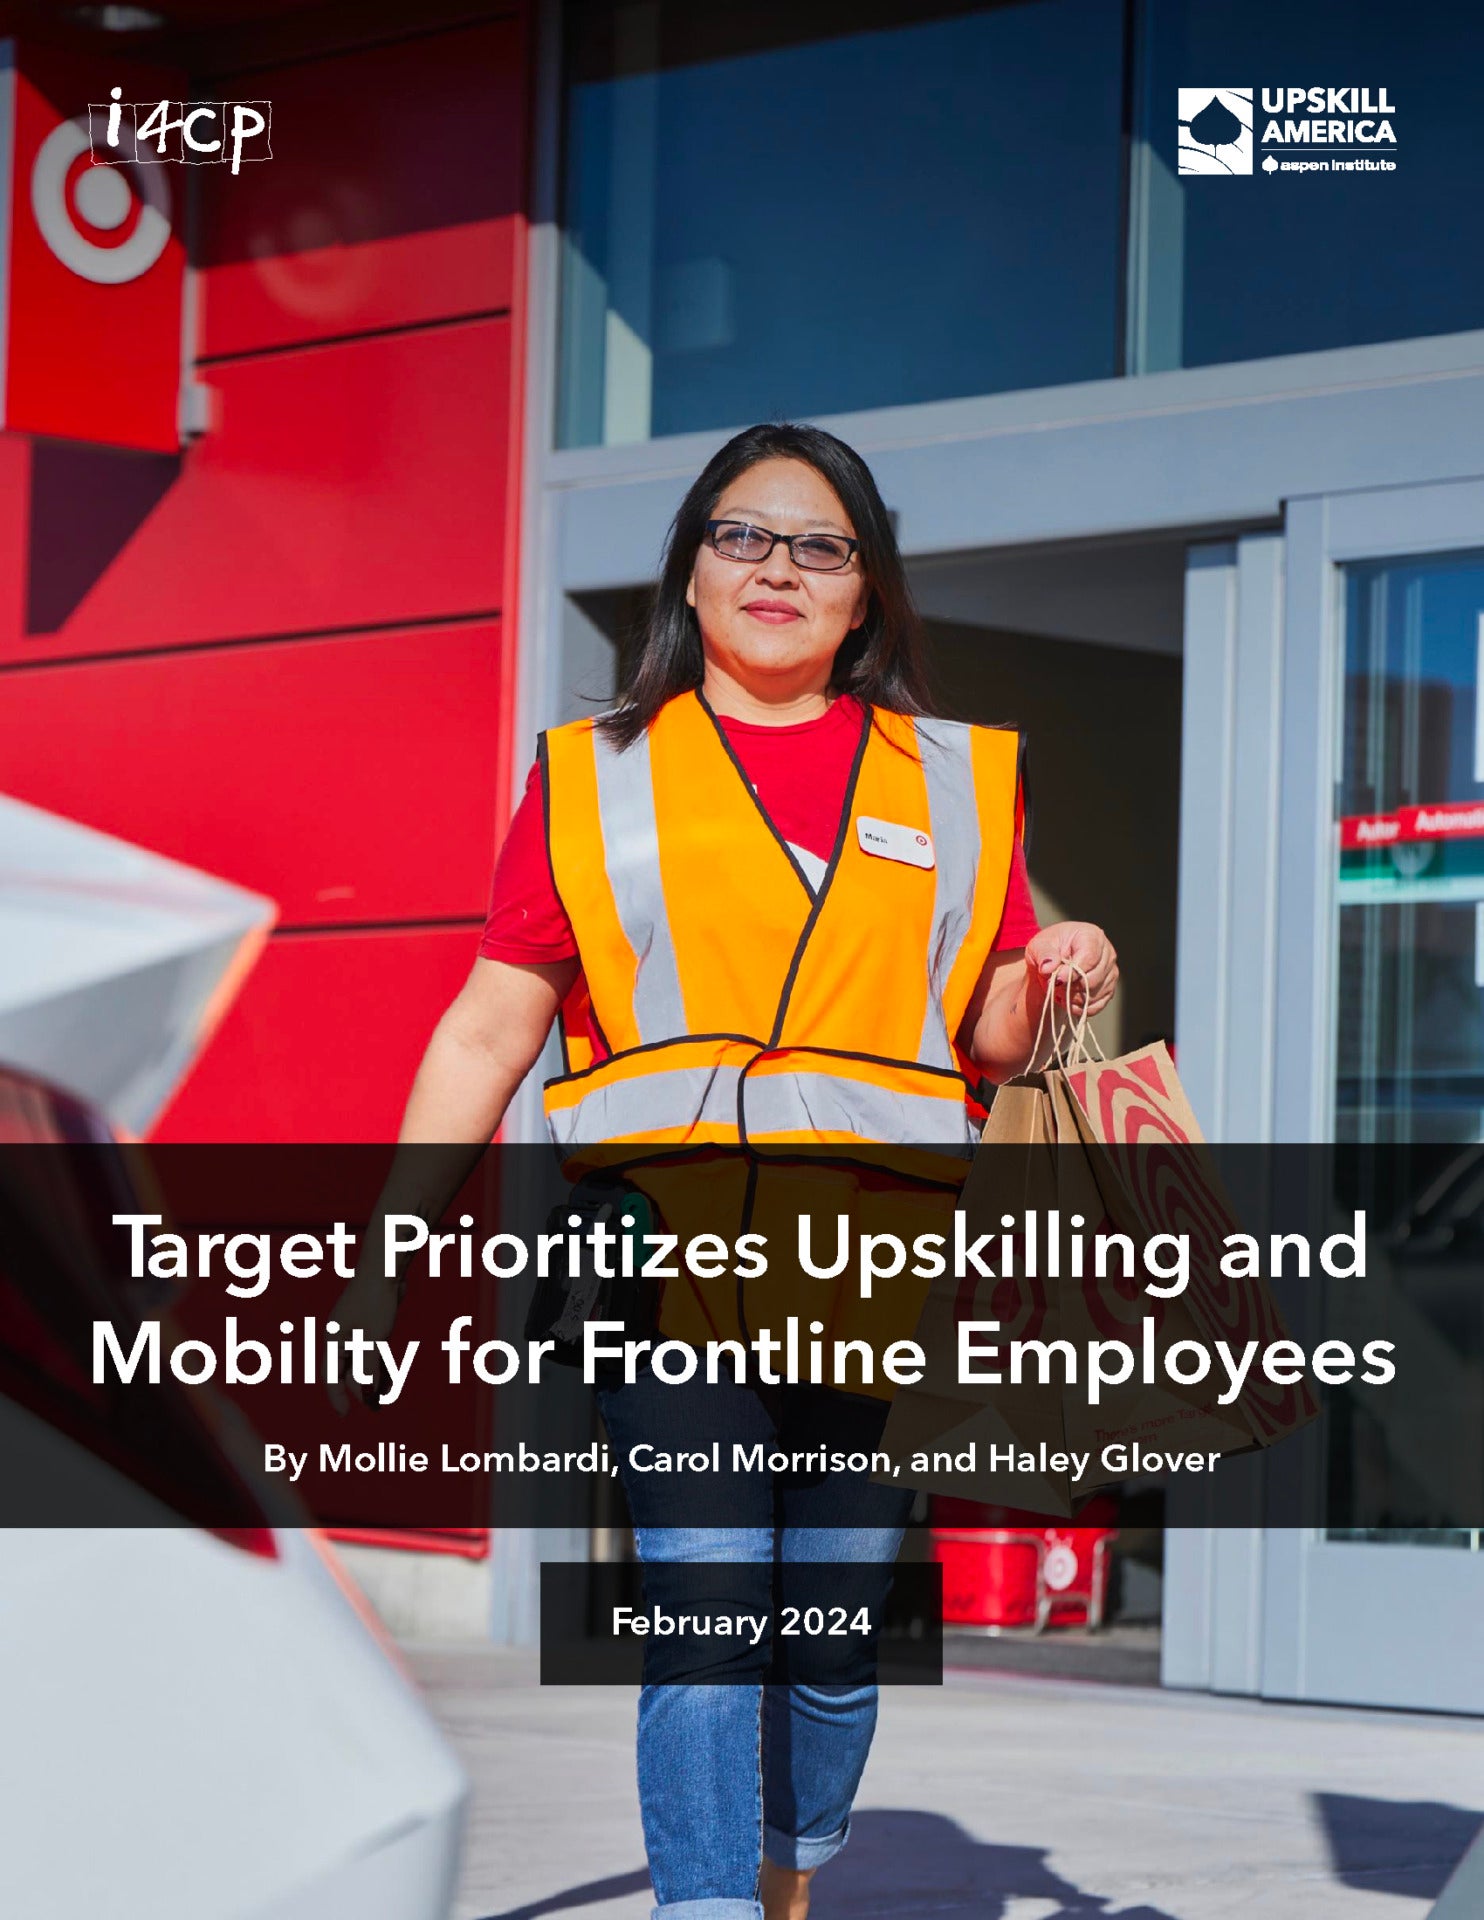 Target Prioritizes Upskilling and Mobility for Frontline Employees